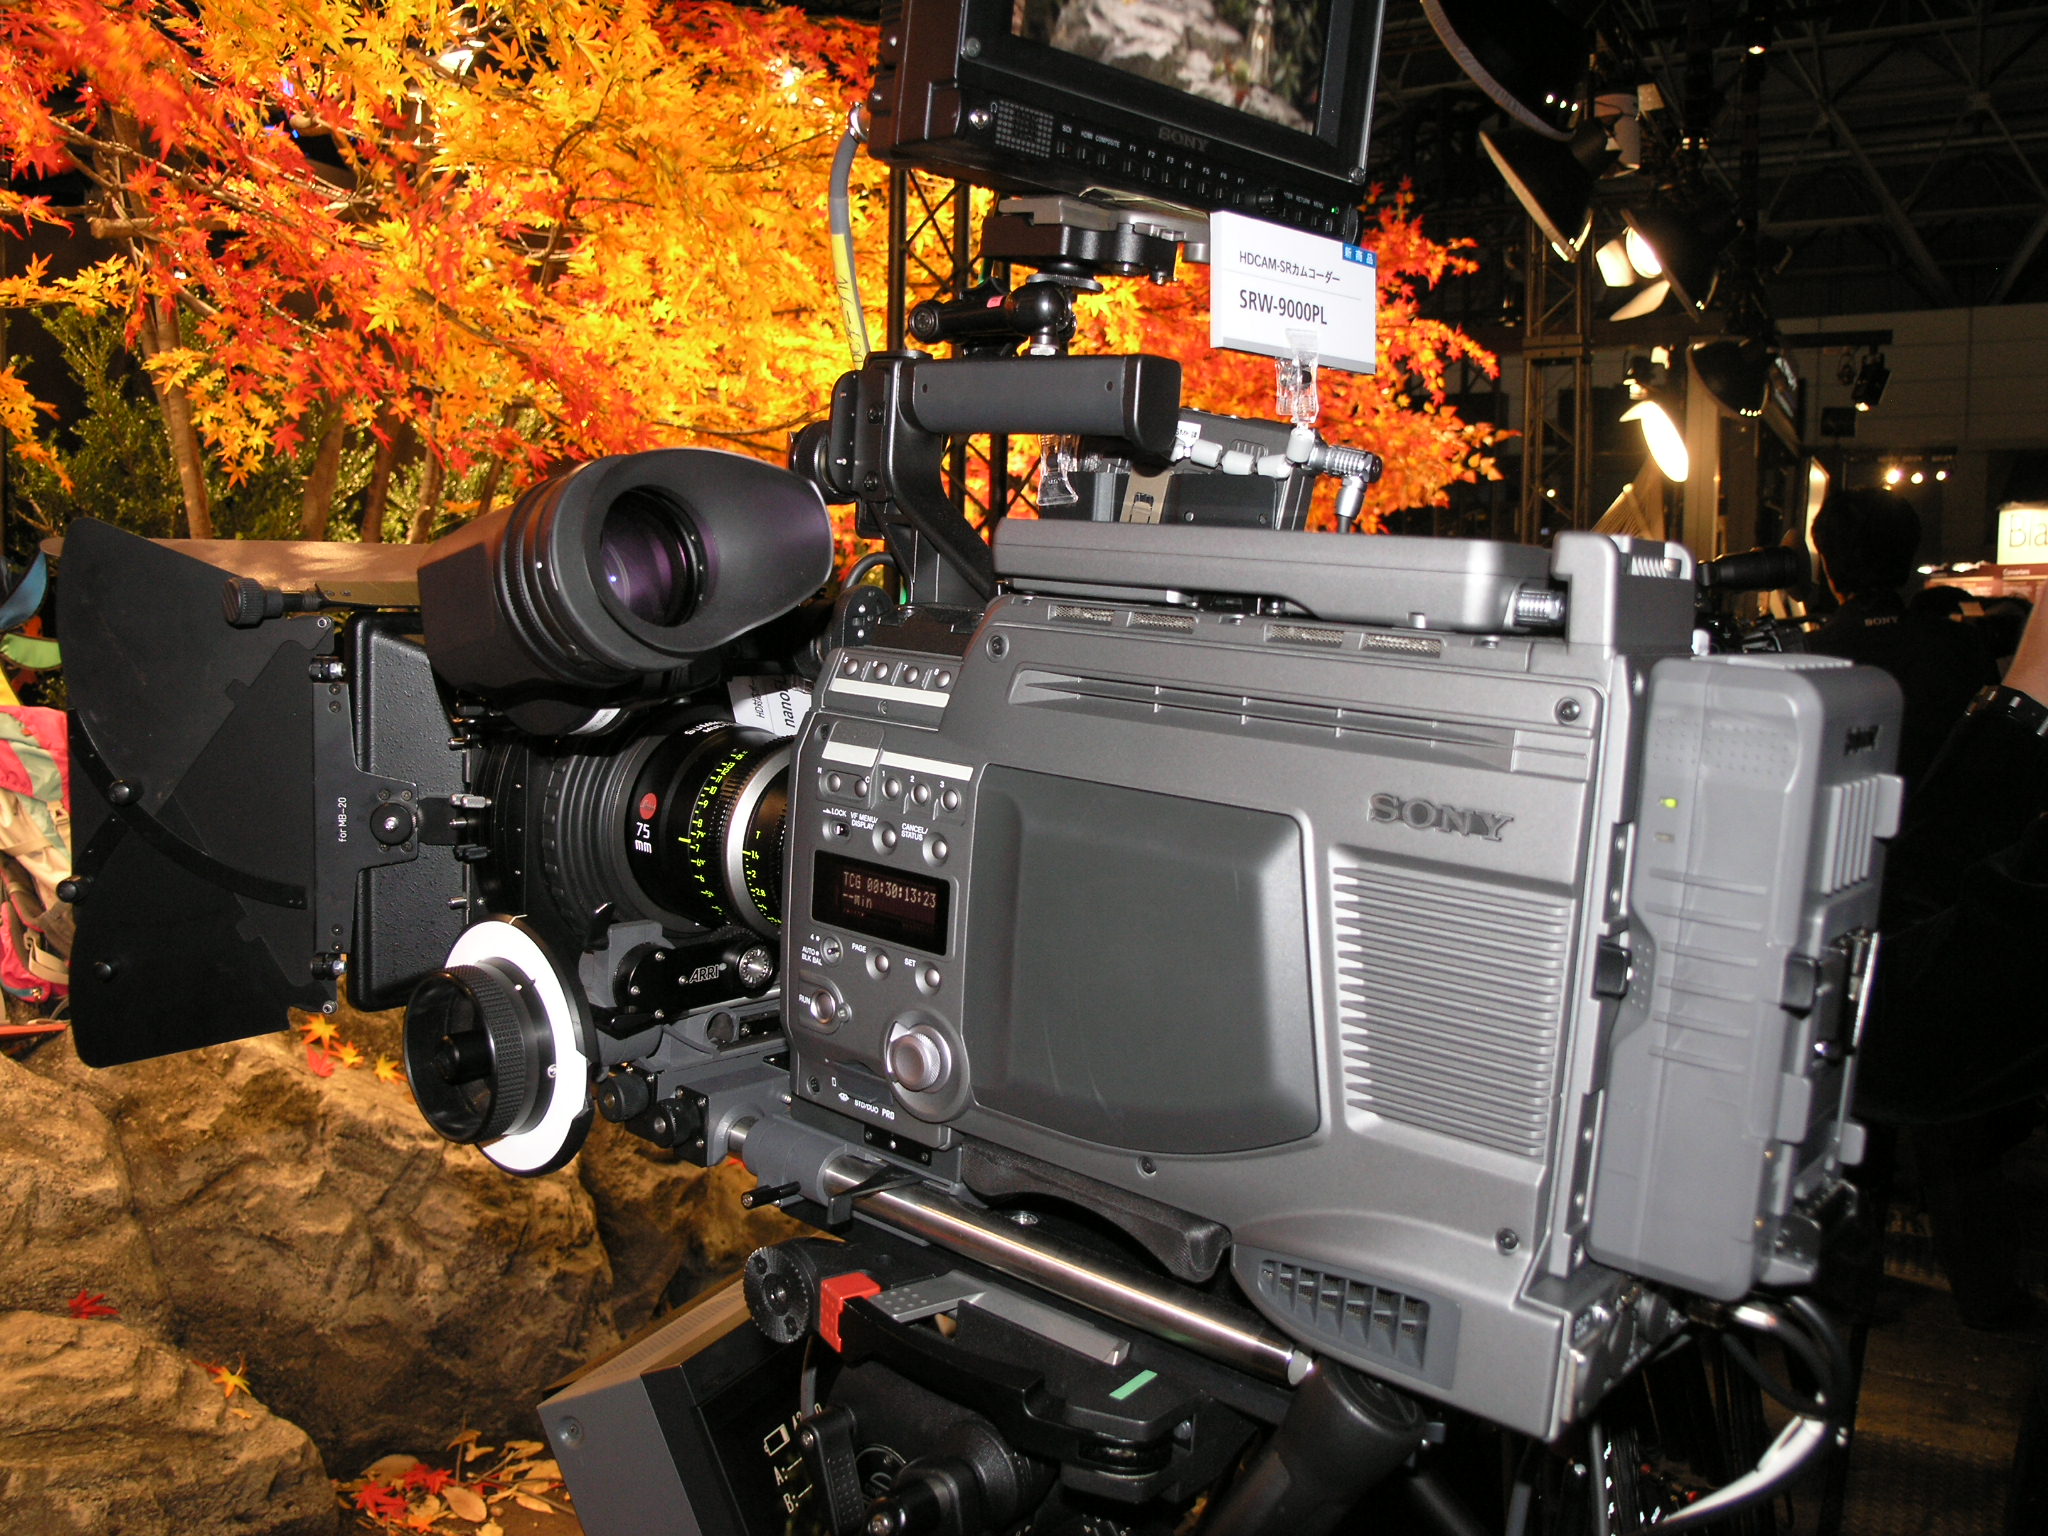 Sony's high-end camcorder.